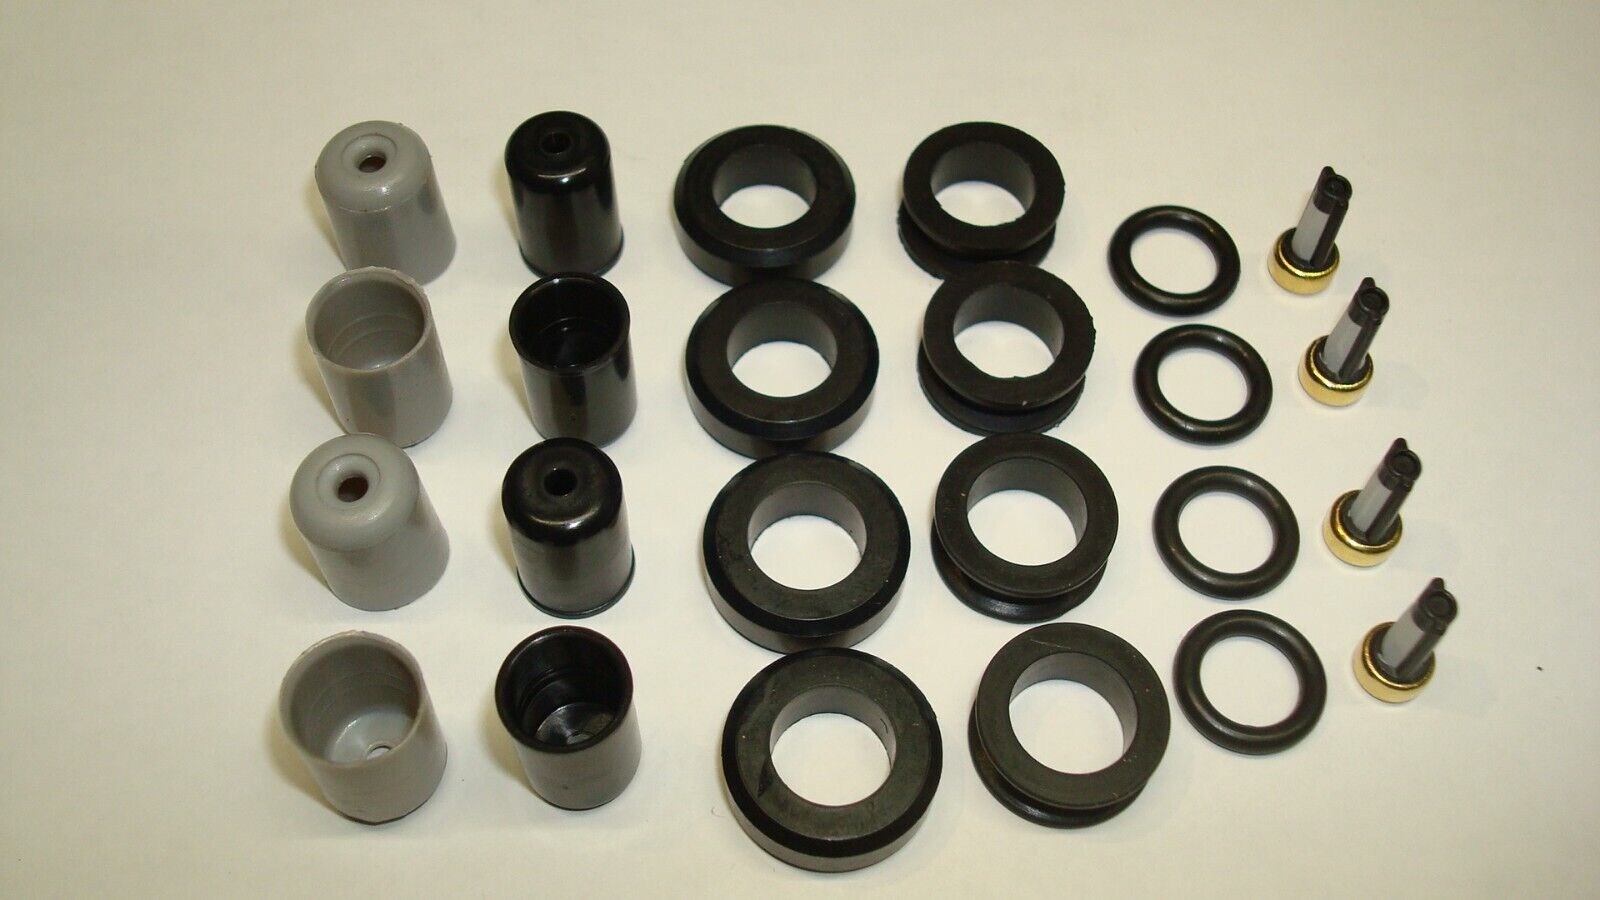 Mazda RX7 13B Rotary Fuel Injector Seal, O-Ring, Filter & Pintle Cap Kit